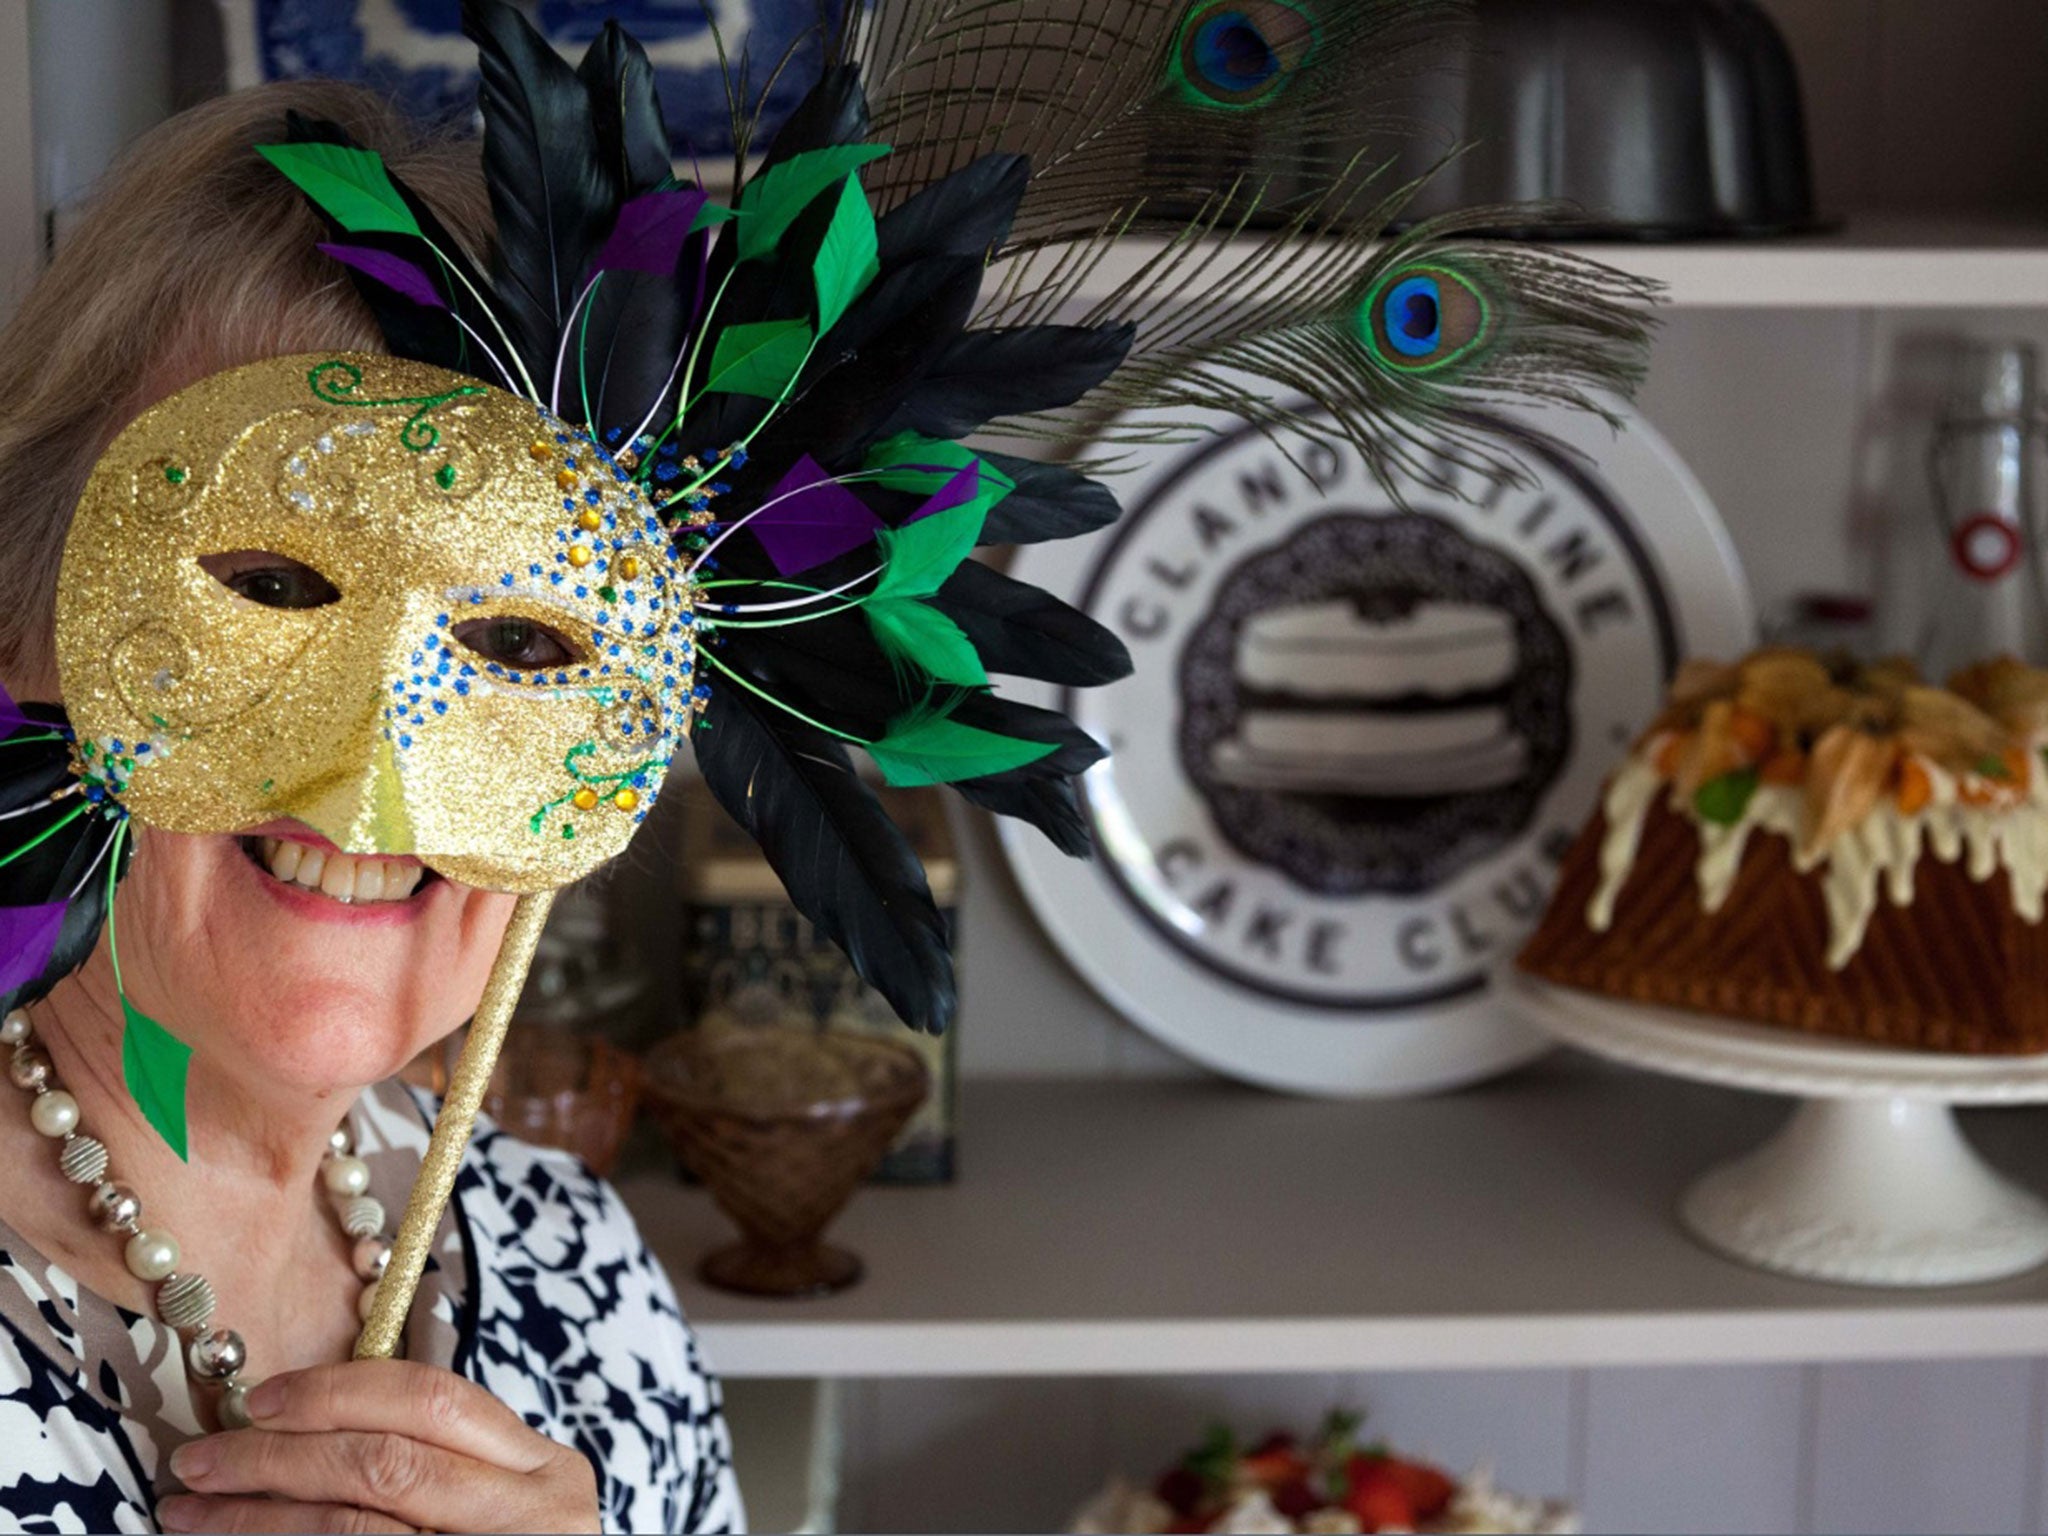 Lynn Hill, pictured, wants the secret baking society to become the 'biggest cake club in the world'